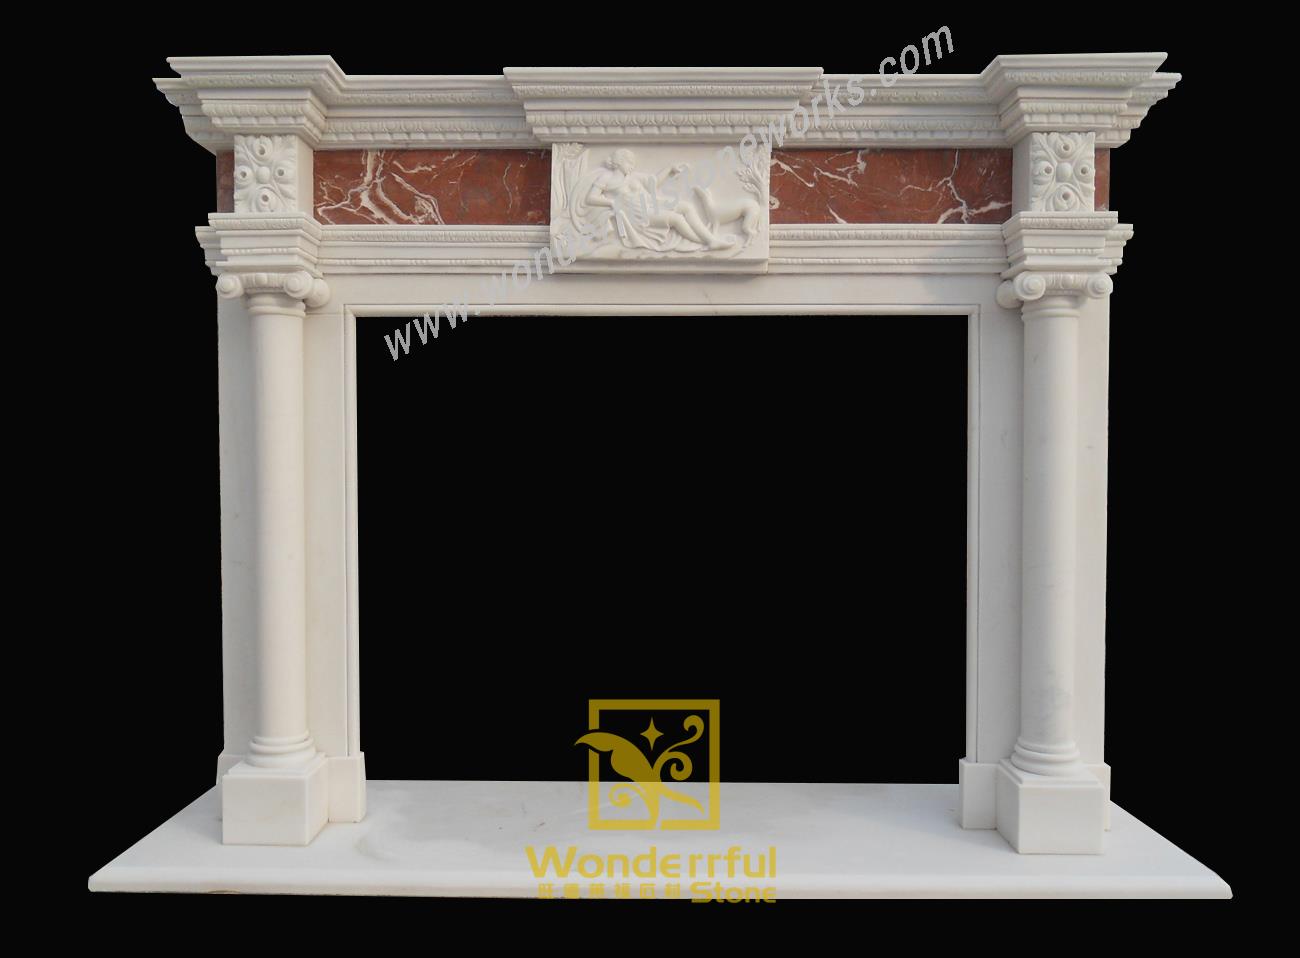 antique fireplace mantel made in Fangshan white marble and Red marble,we can prodduce as per your specific request, we have various materials for your options.